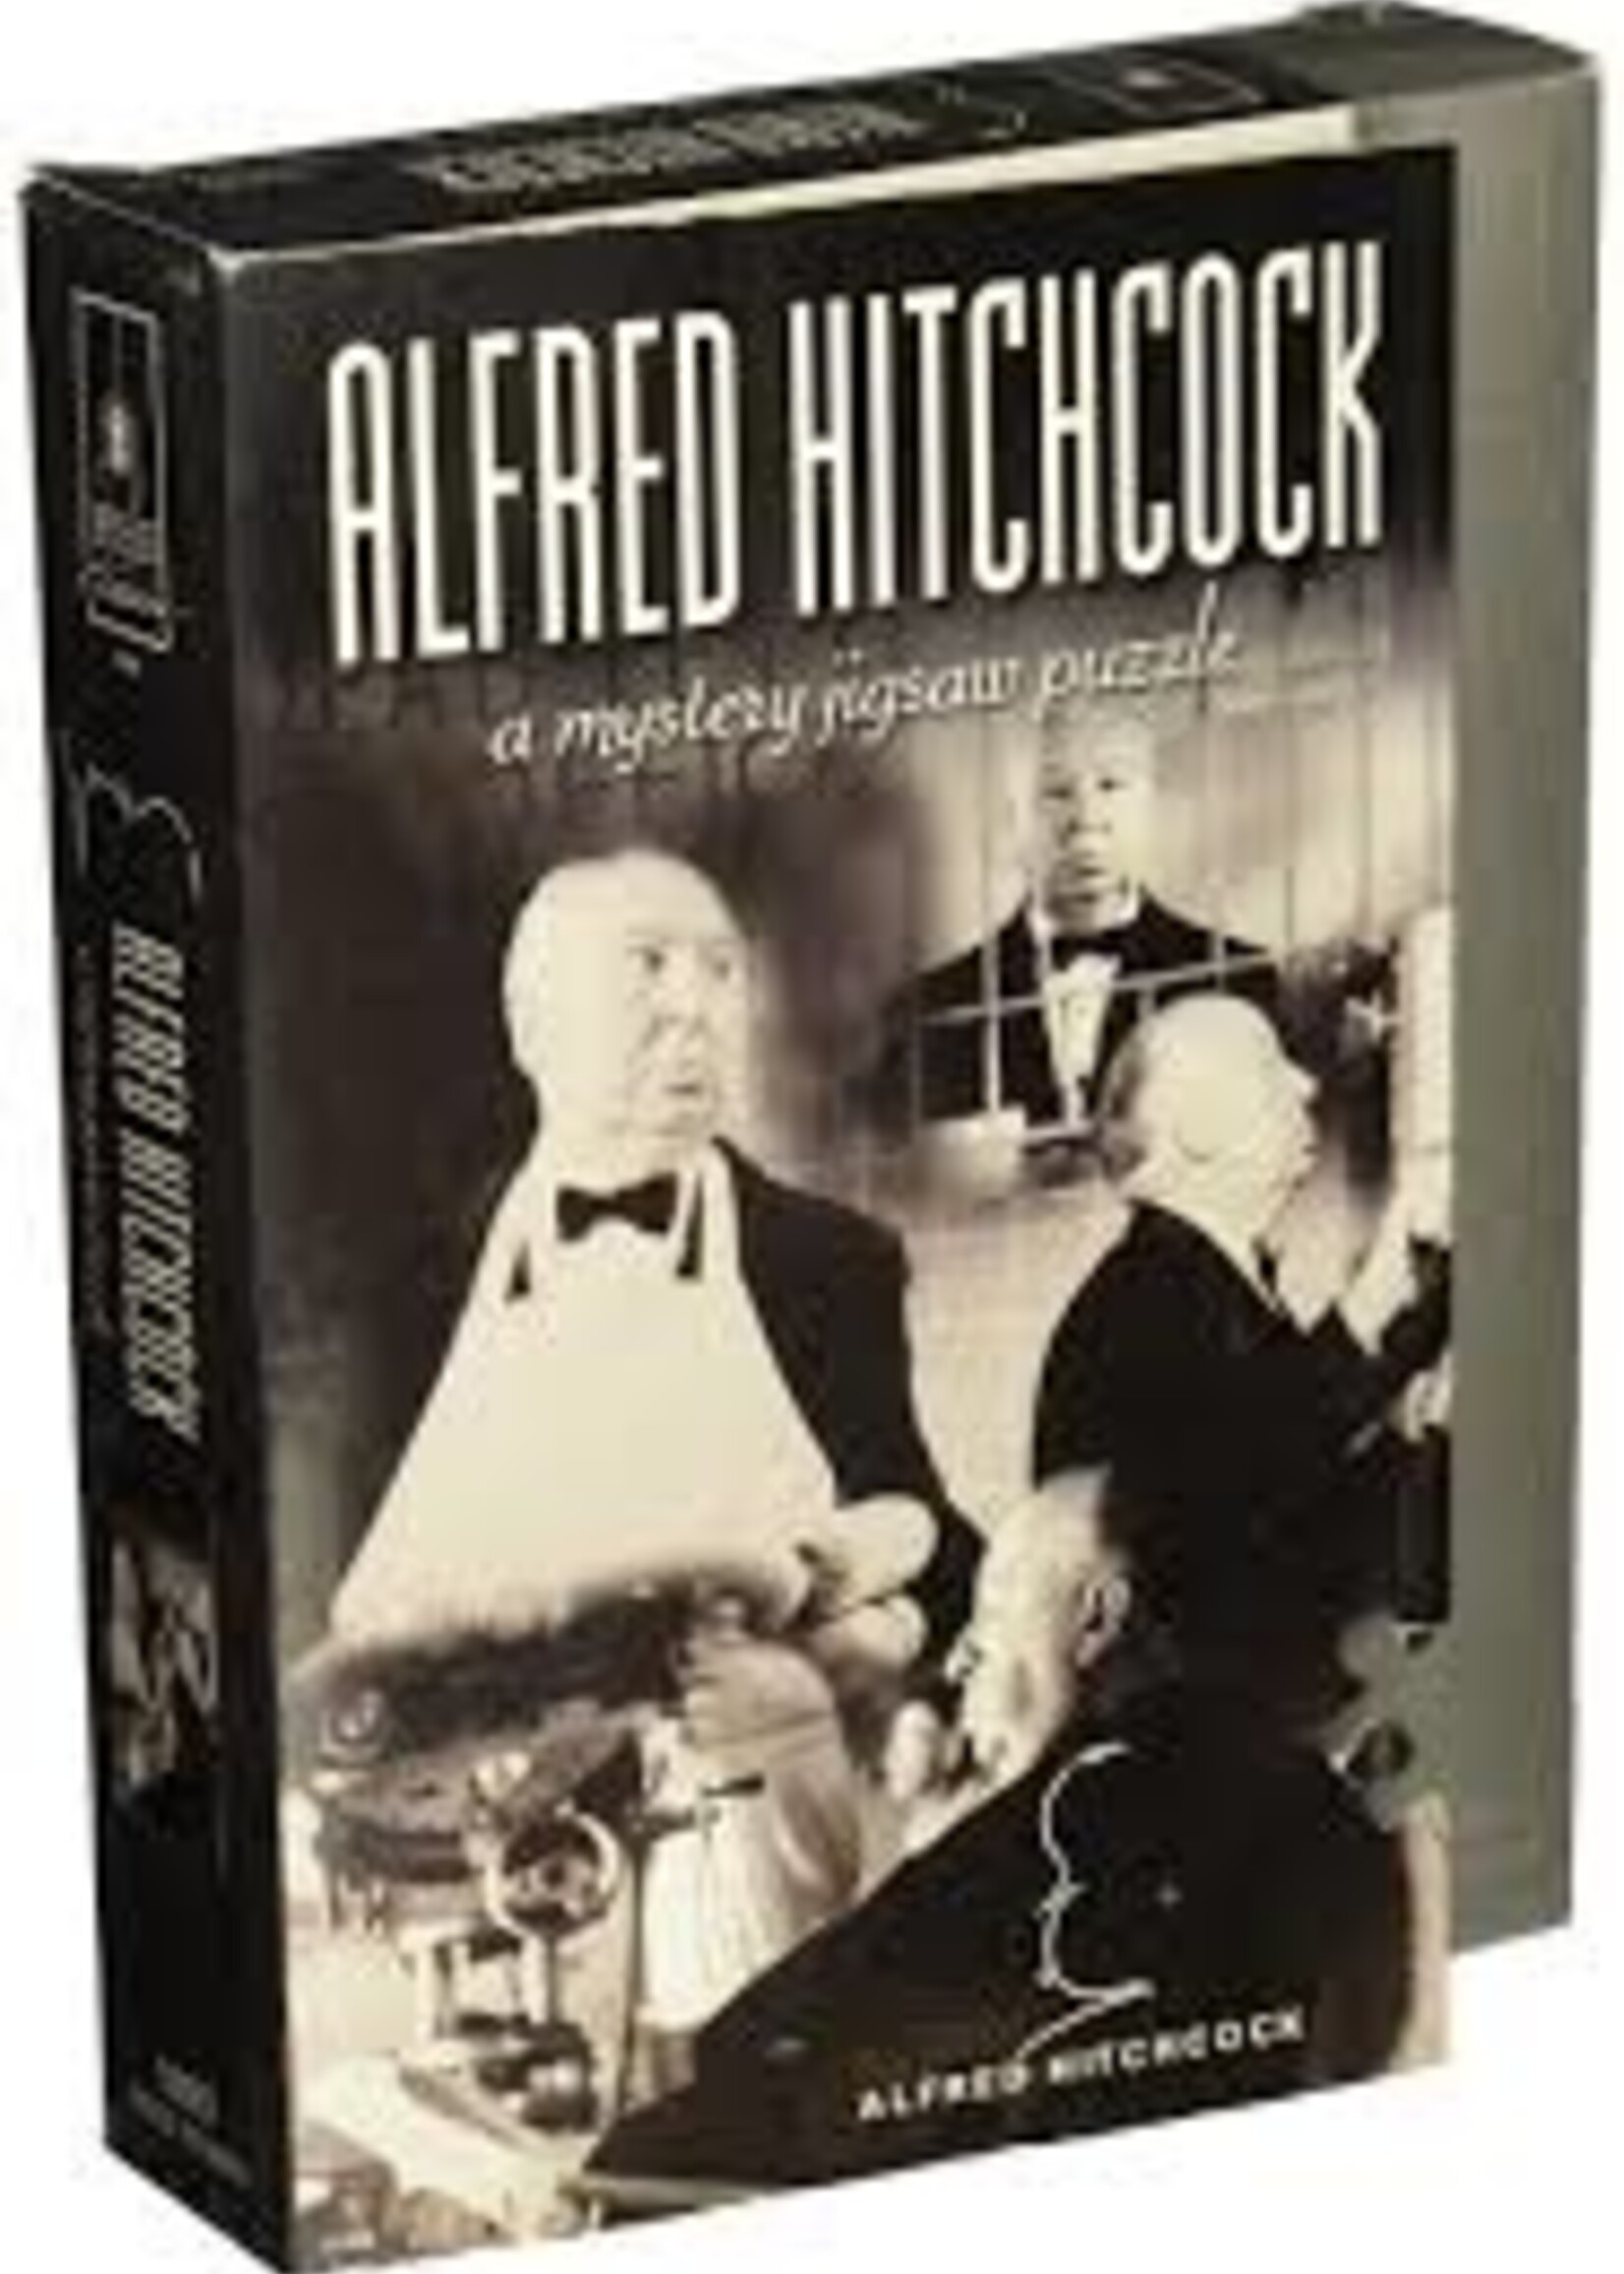 University Games Puzzle - Alfred Hitchcock: A Mystery Jigsaw Puzzle 1000 Pc.